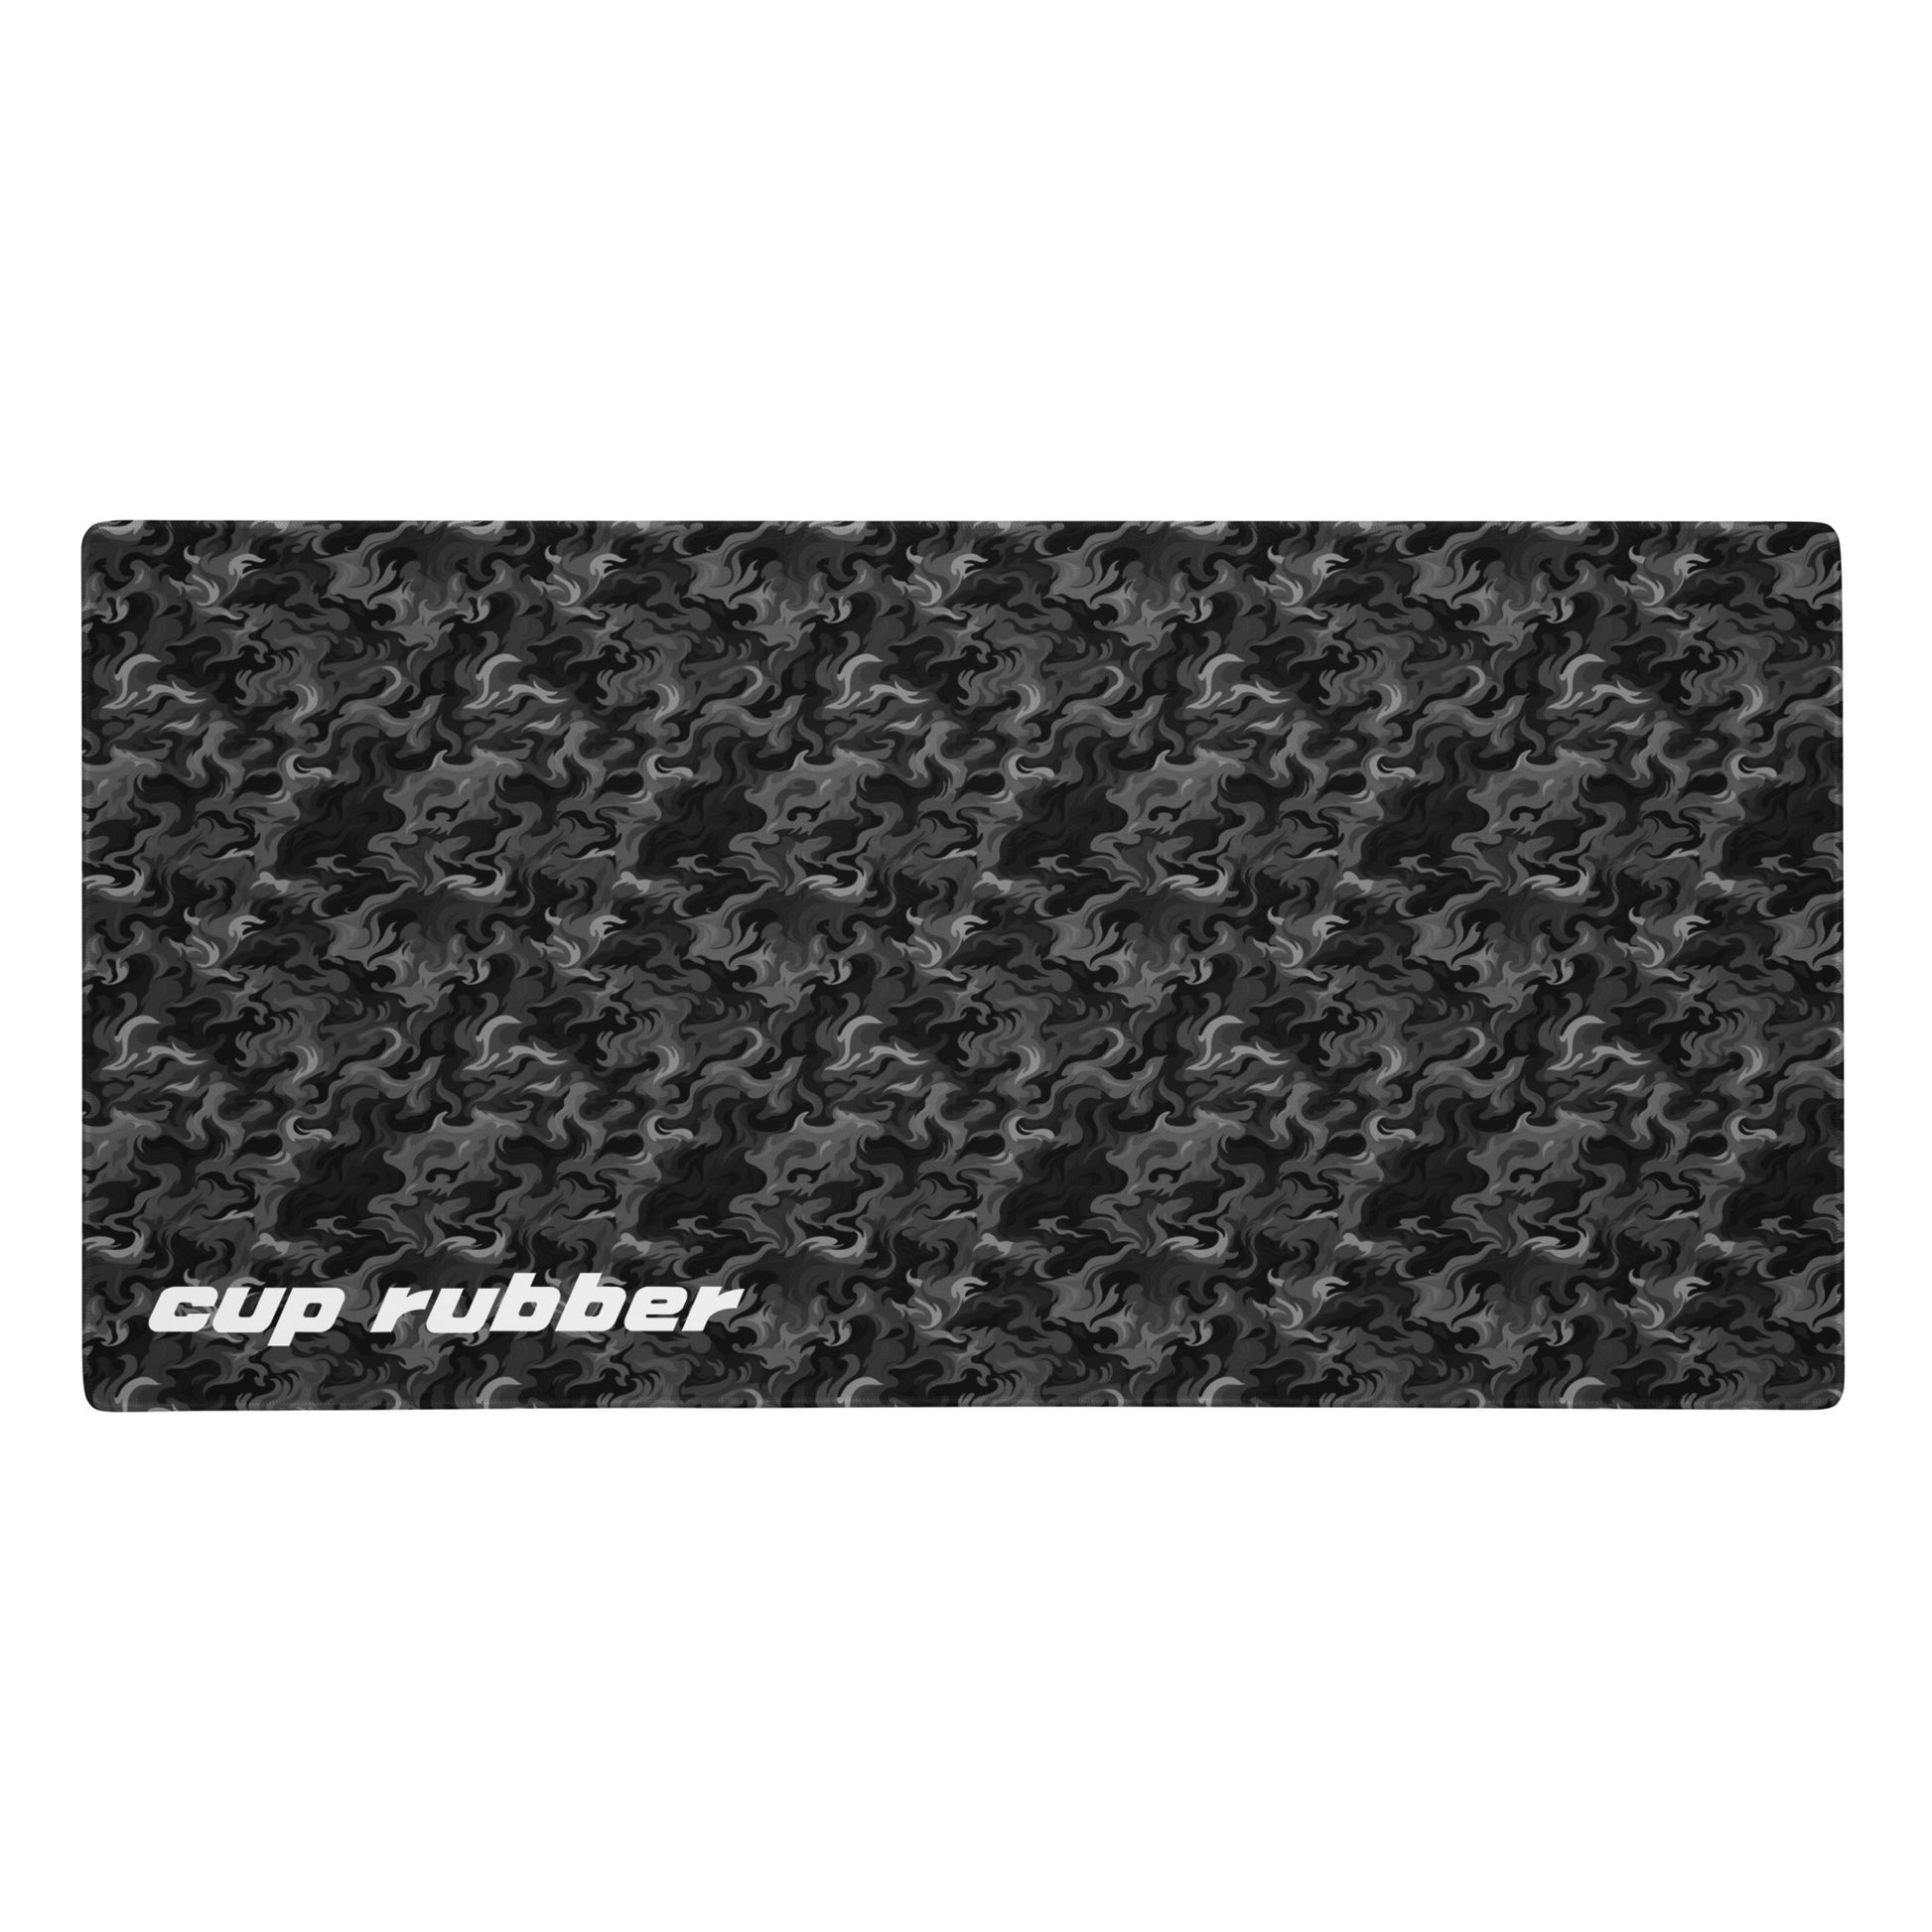 A 36" x 18" desk pad with a camo pattern all over it and the word "Cup Rubber" in the bottom left corner. Black and Charcoal in color.